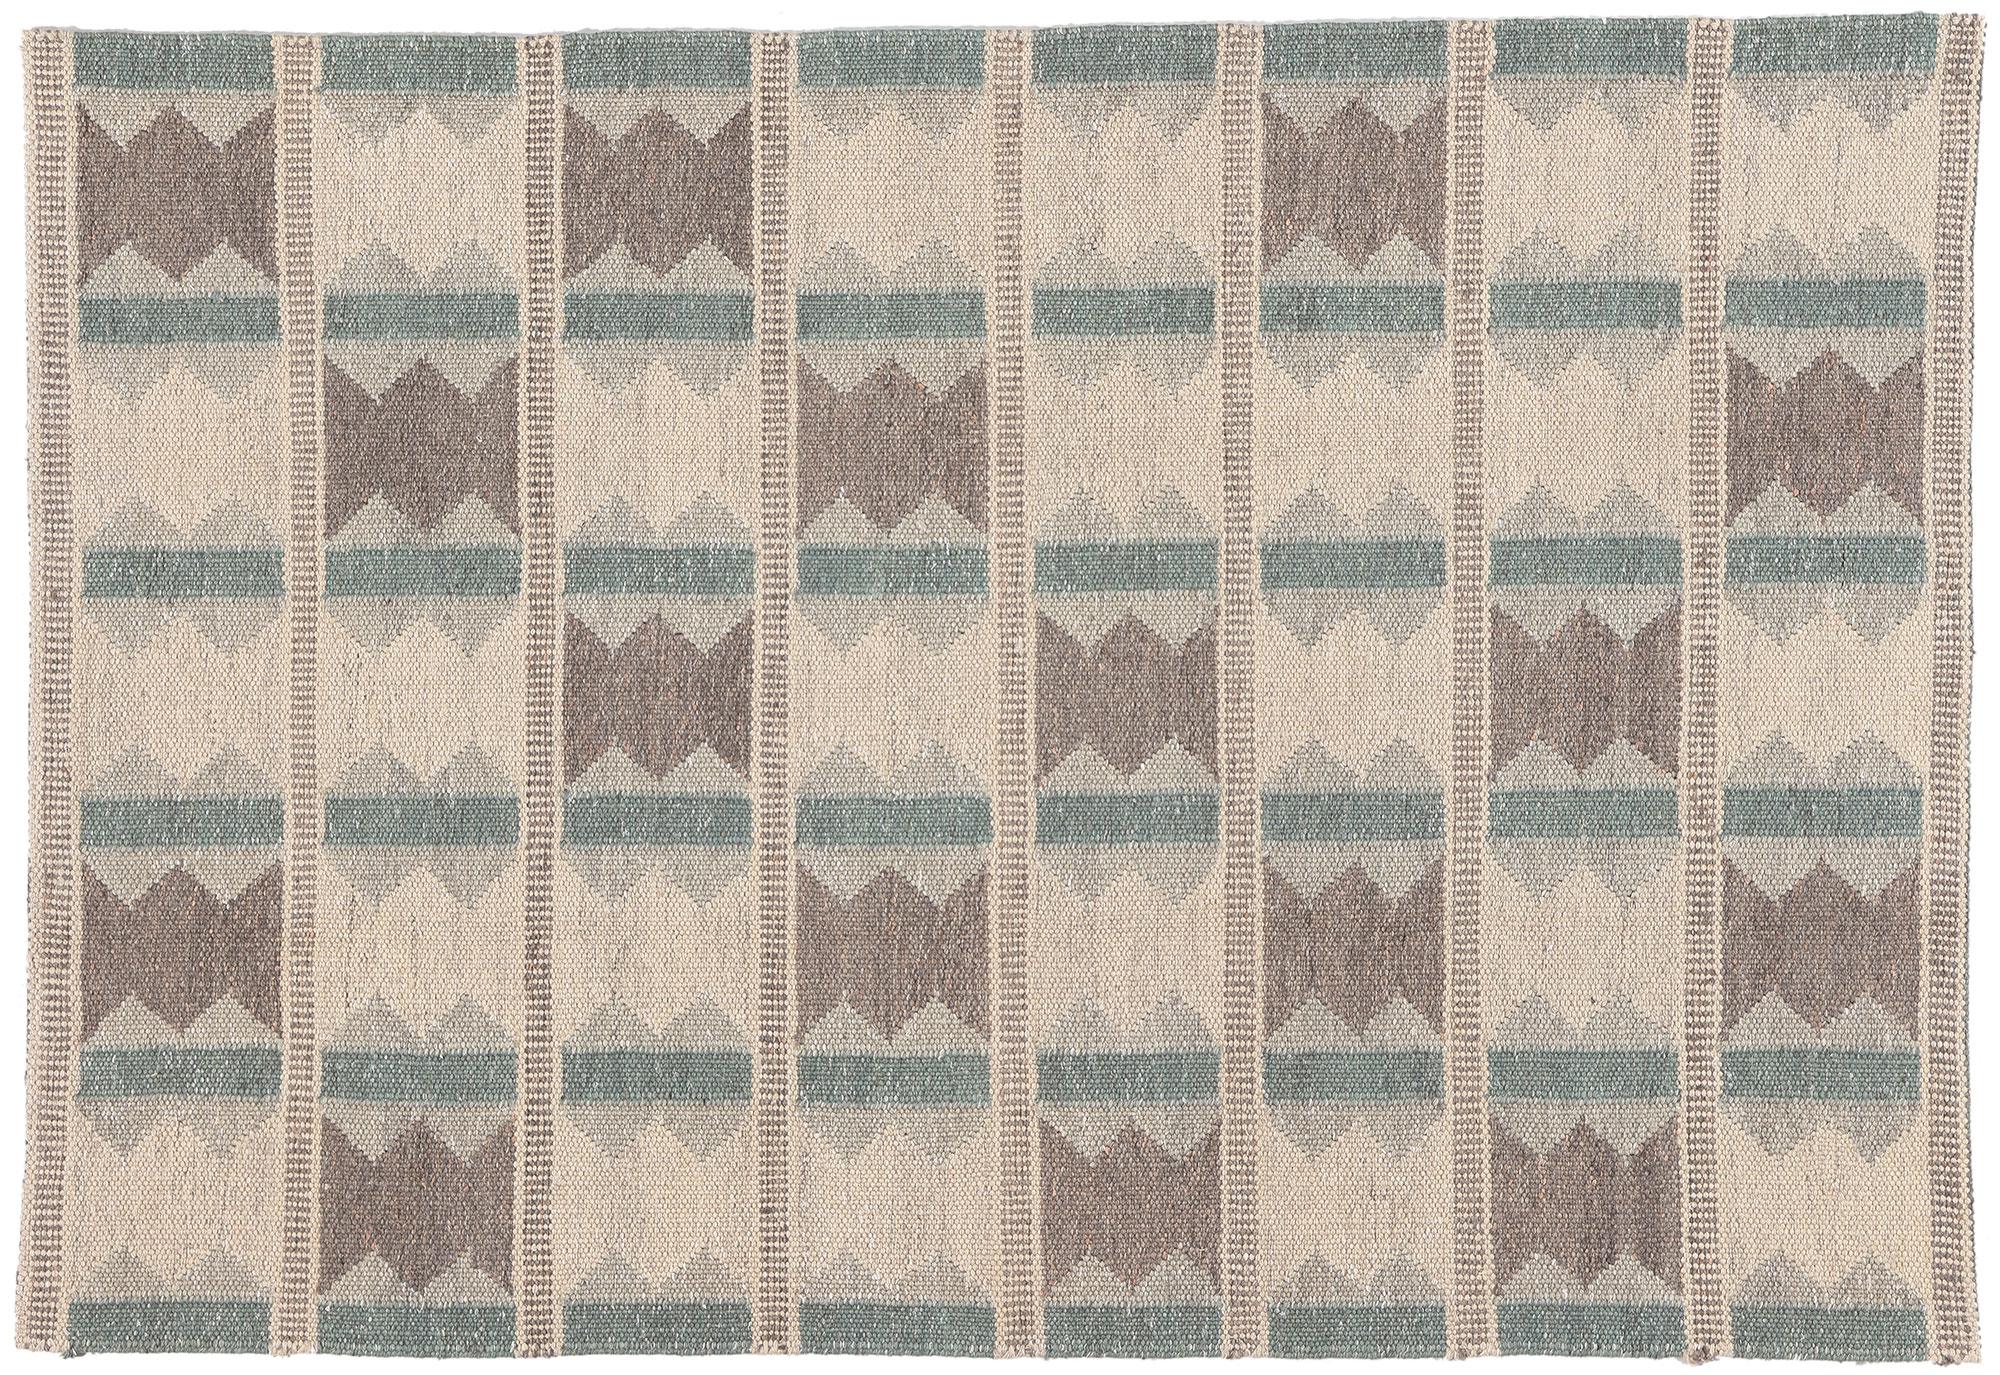 Ingegerd Silow Swedish Inspired Kilim Rug, Scandi Style Meets Sublime Simplicity For Sale 5